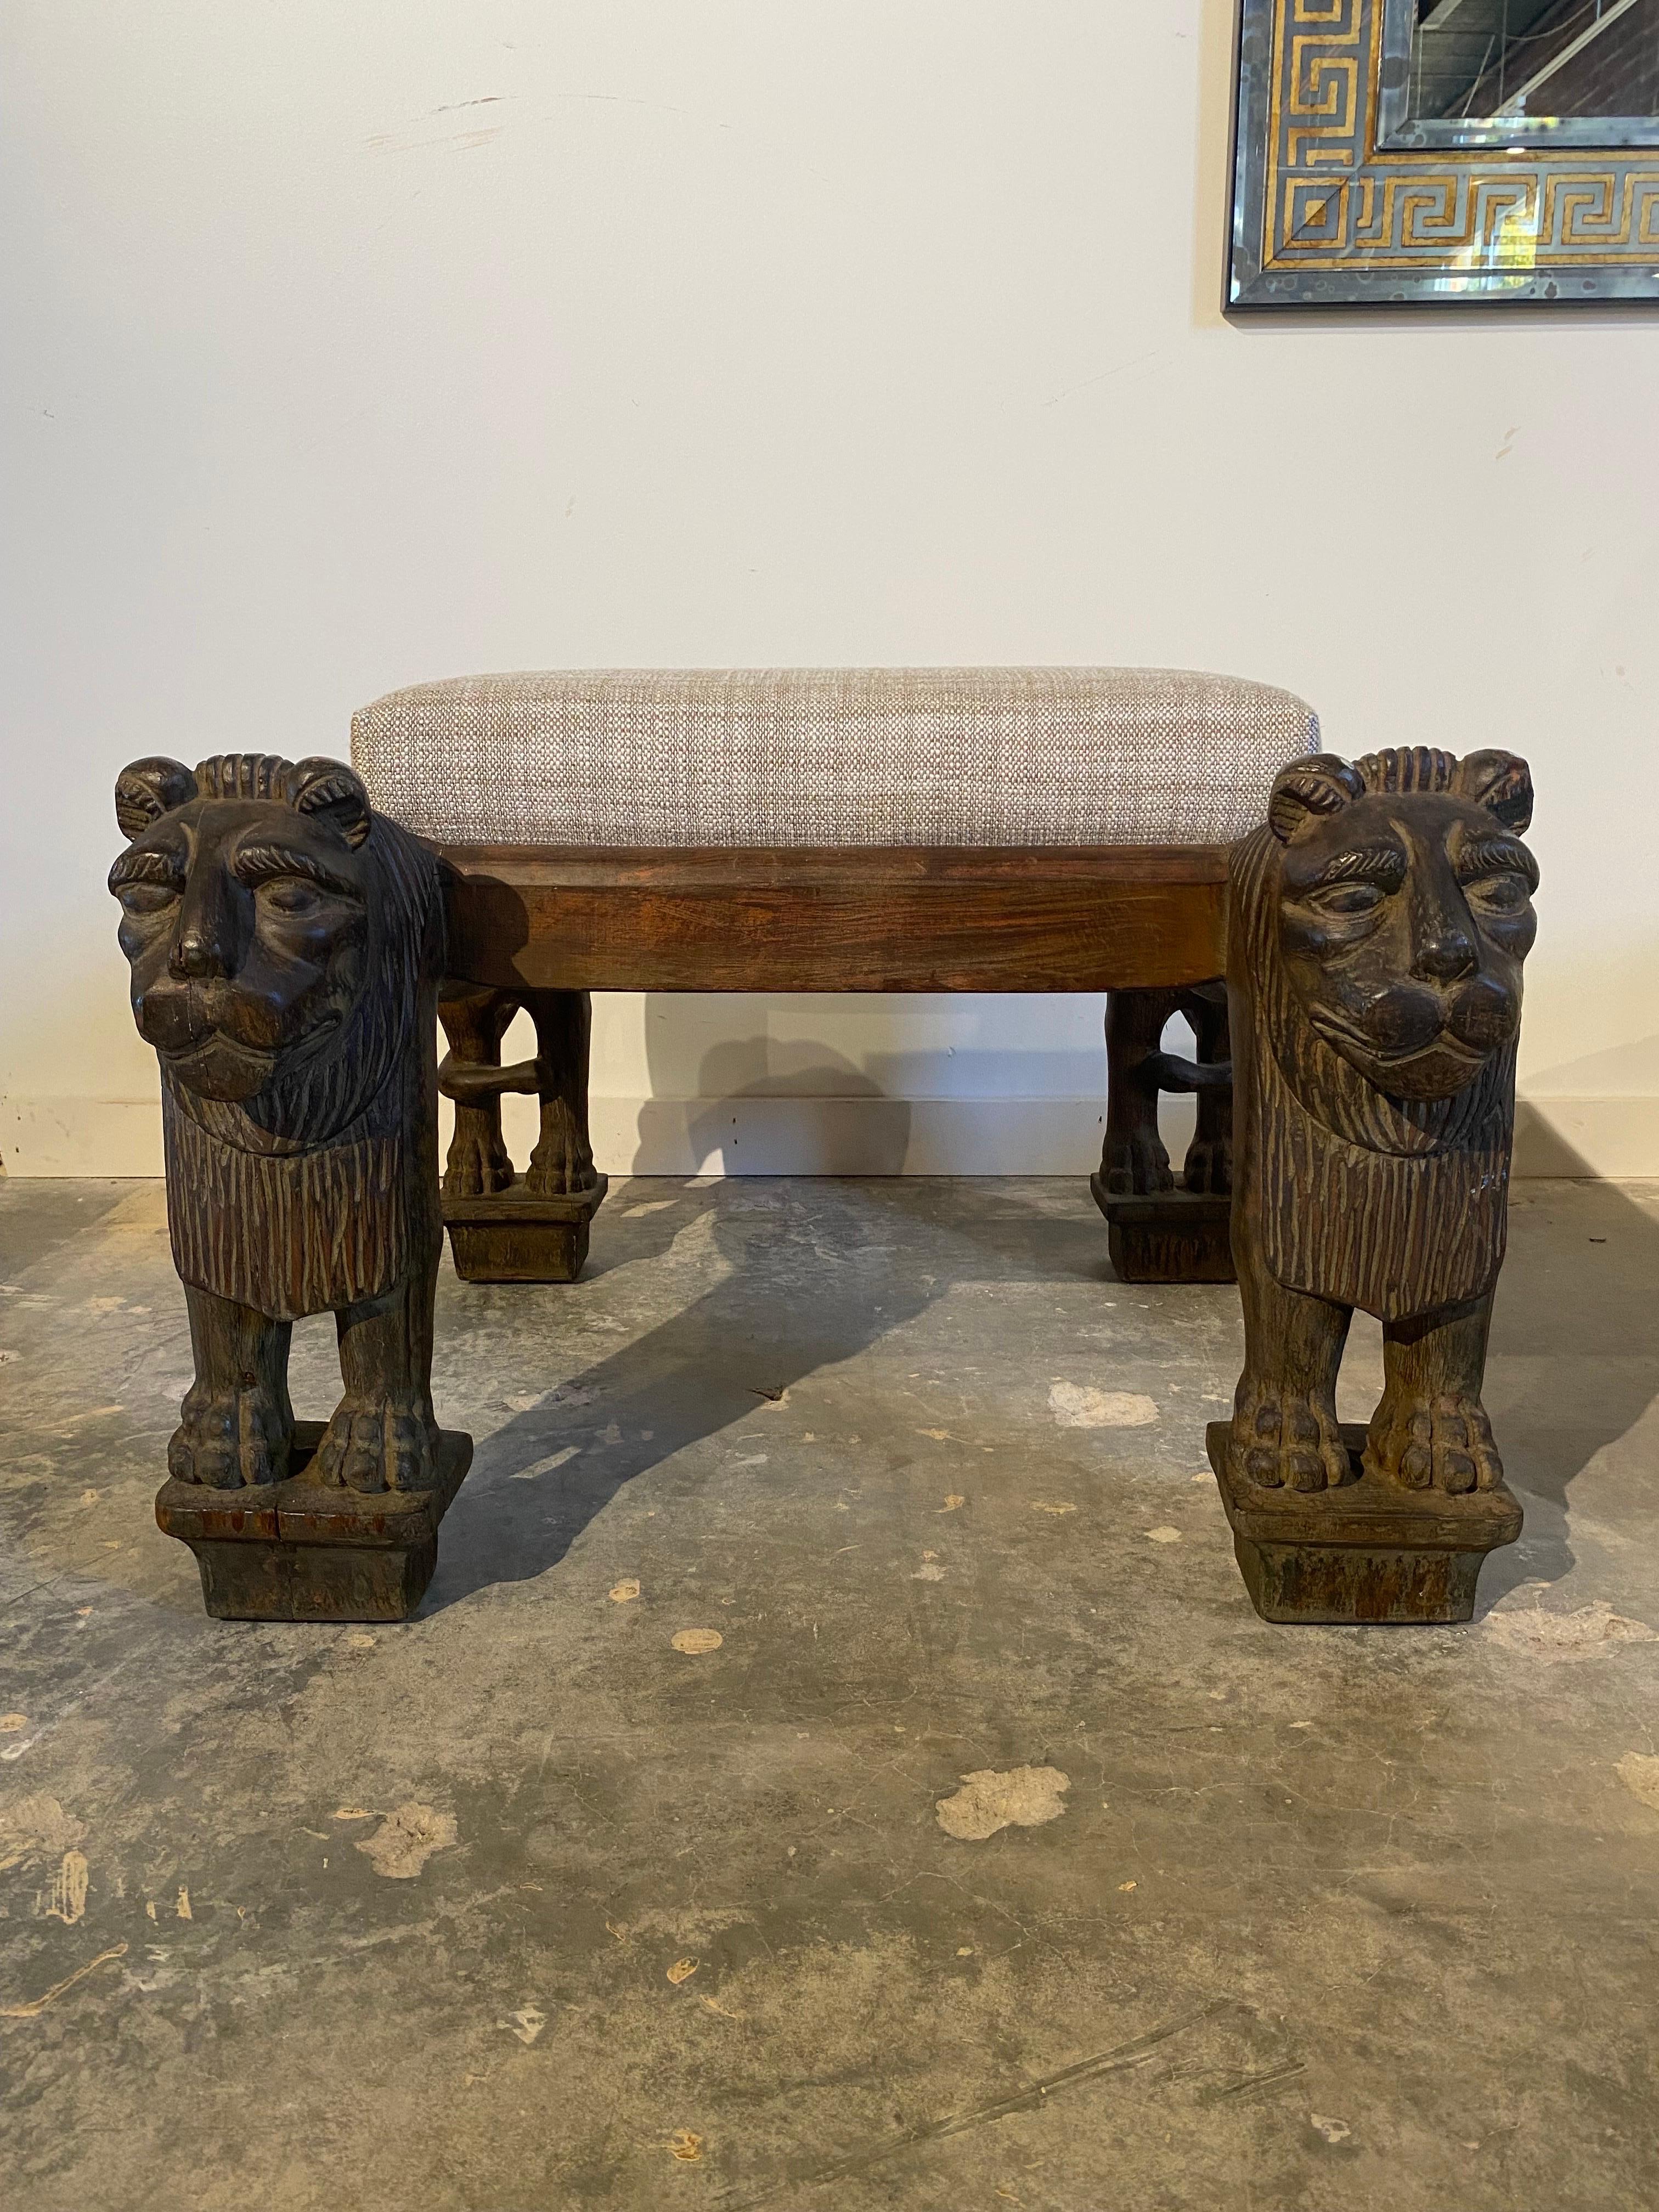 Intricately carved lion benches in the style of Maison Jansen. Newly upholstered in a textured heavy cotton weave.